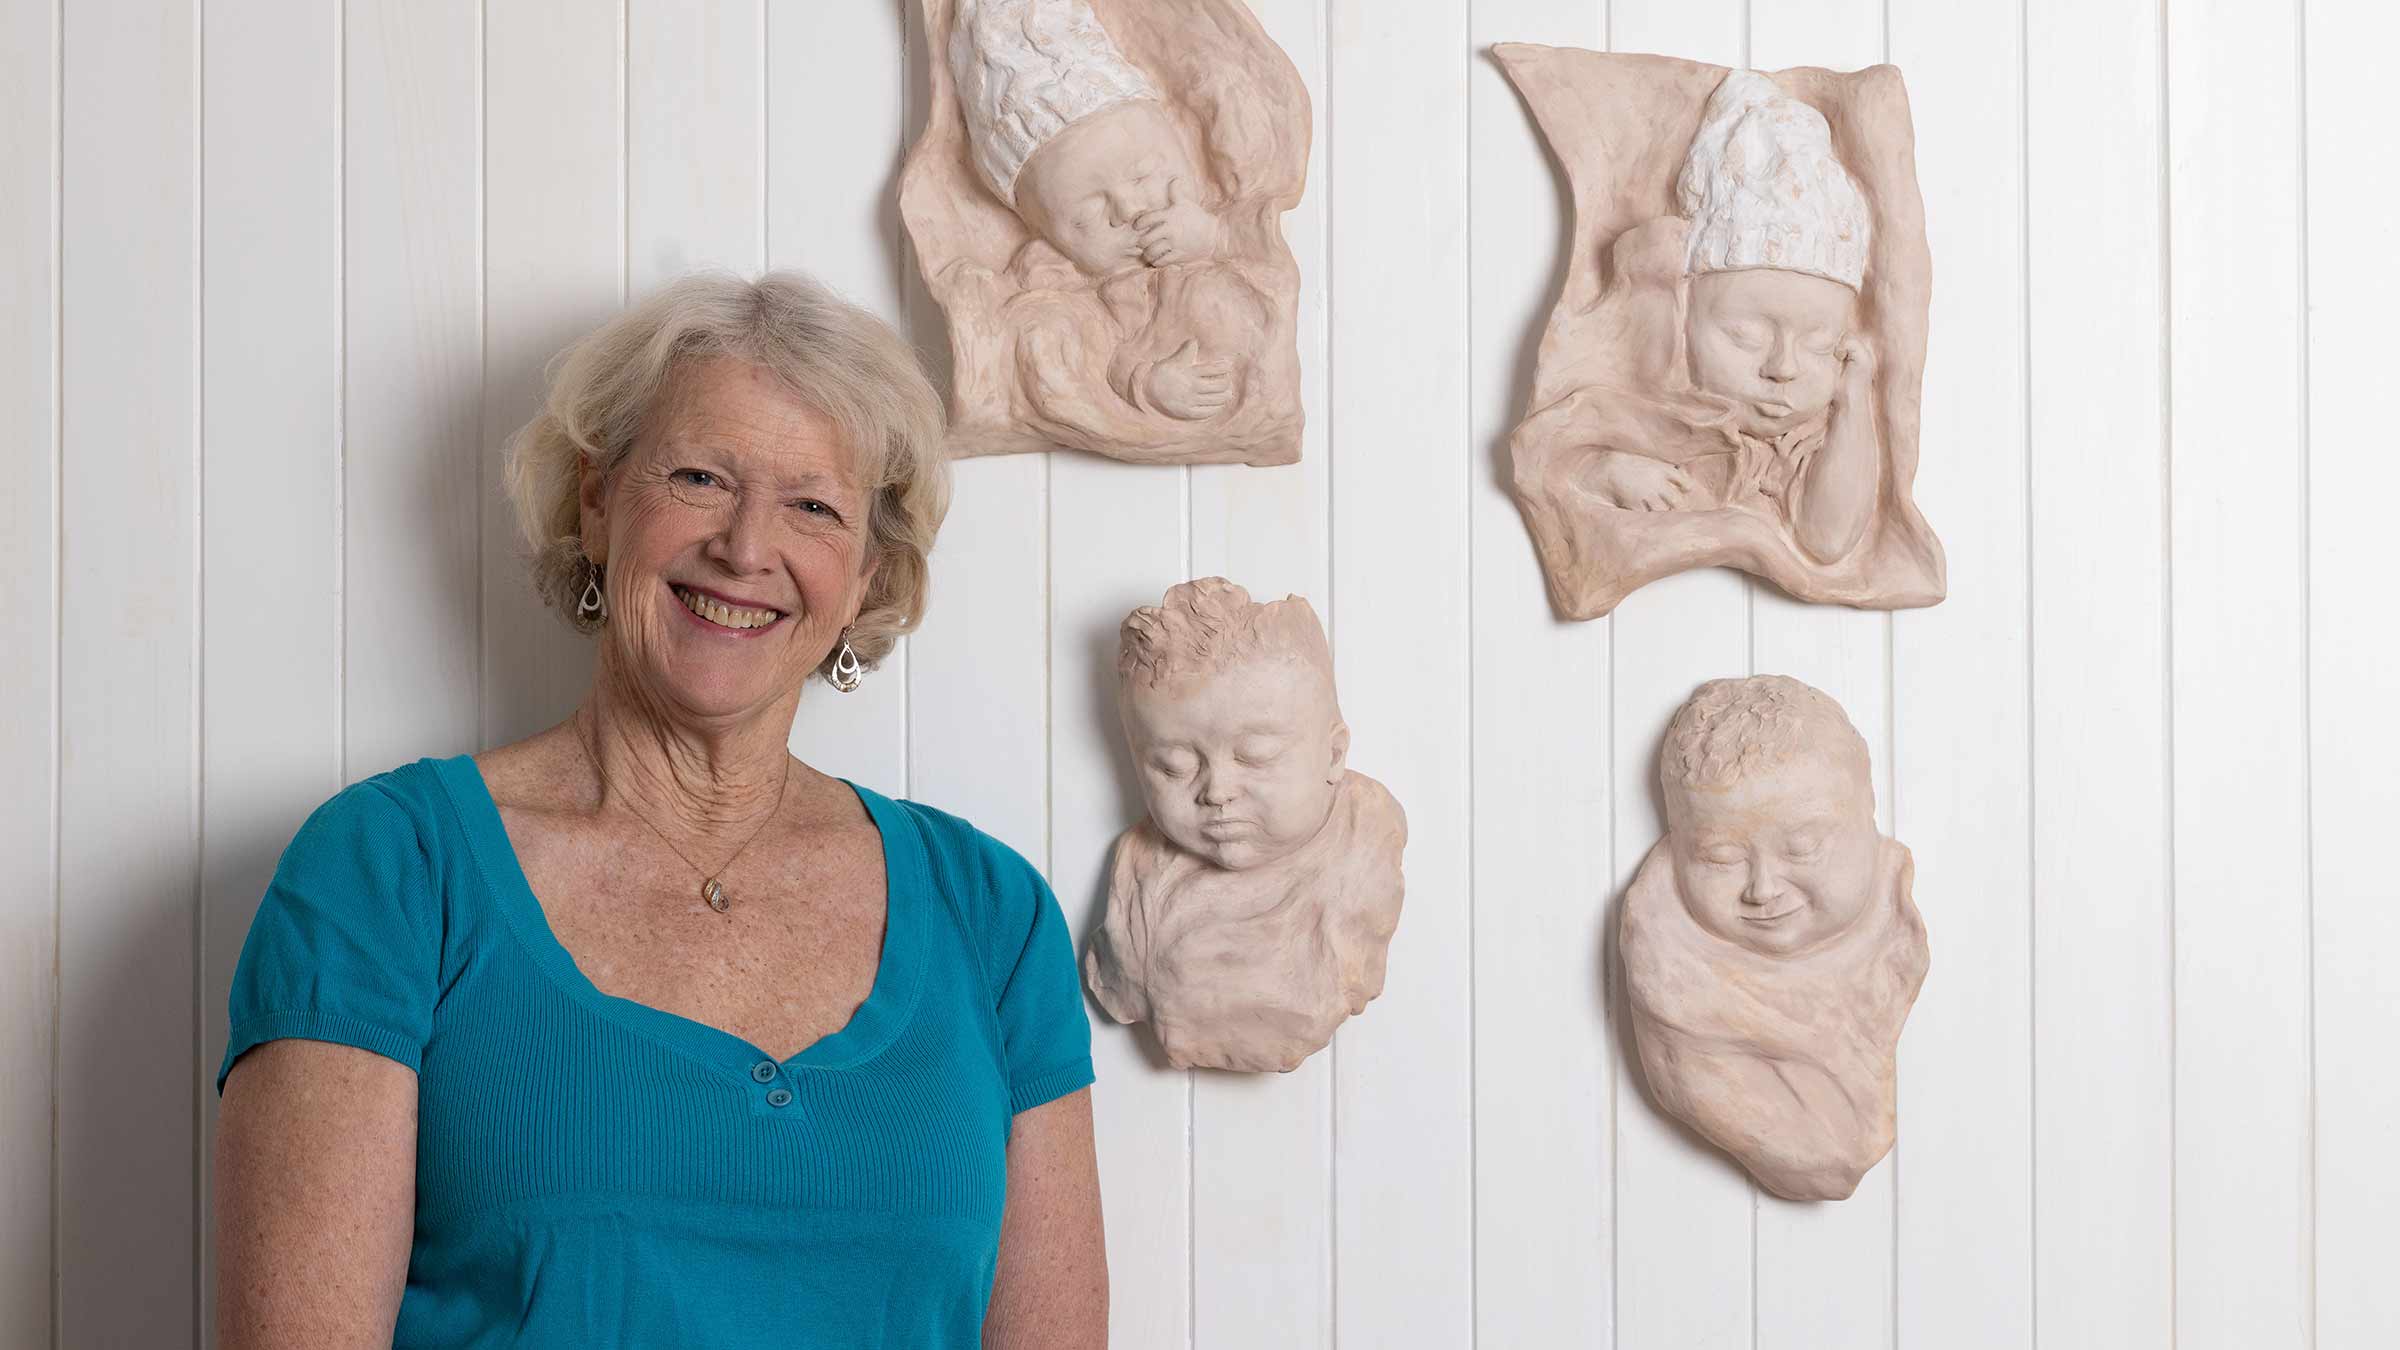 Dr. Maryanna Klatt, smiling and posing with sculptures she made of her grandchildren as babies